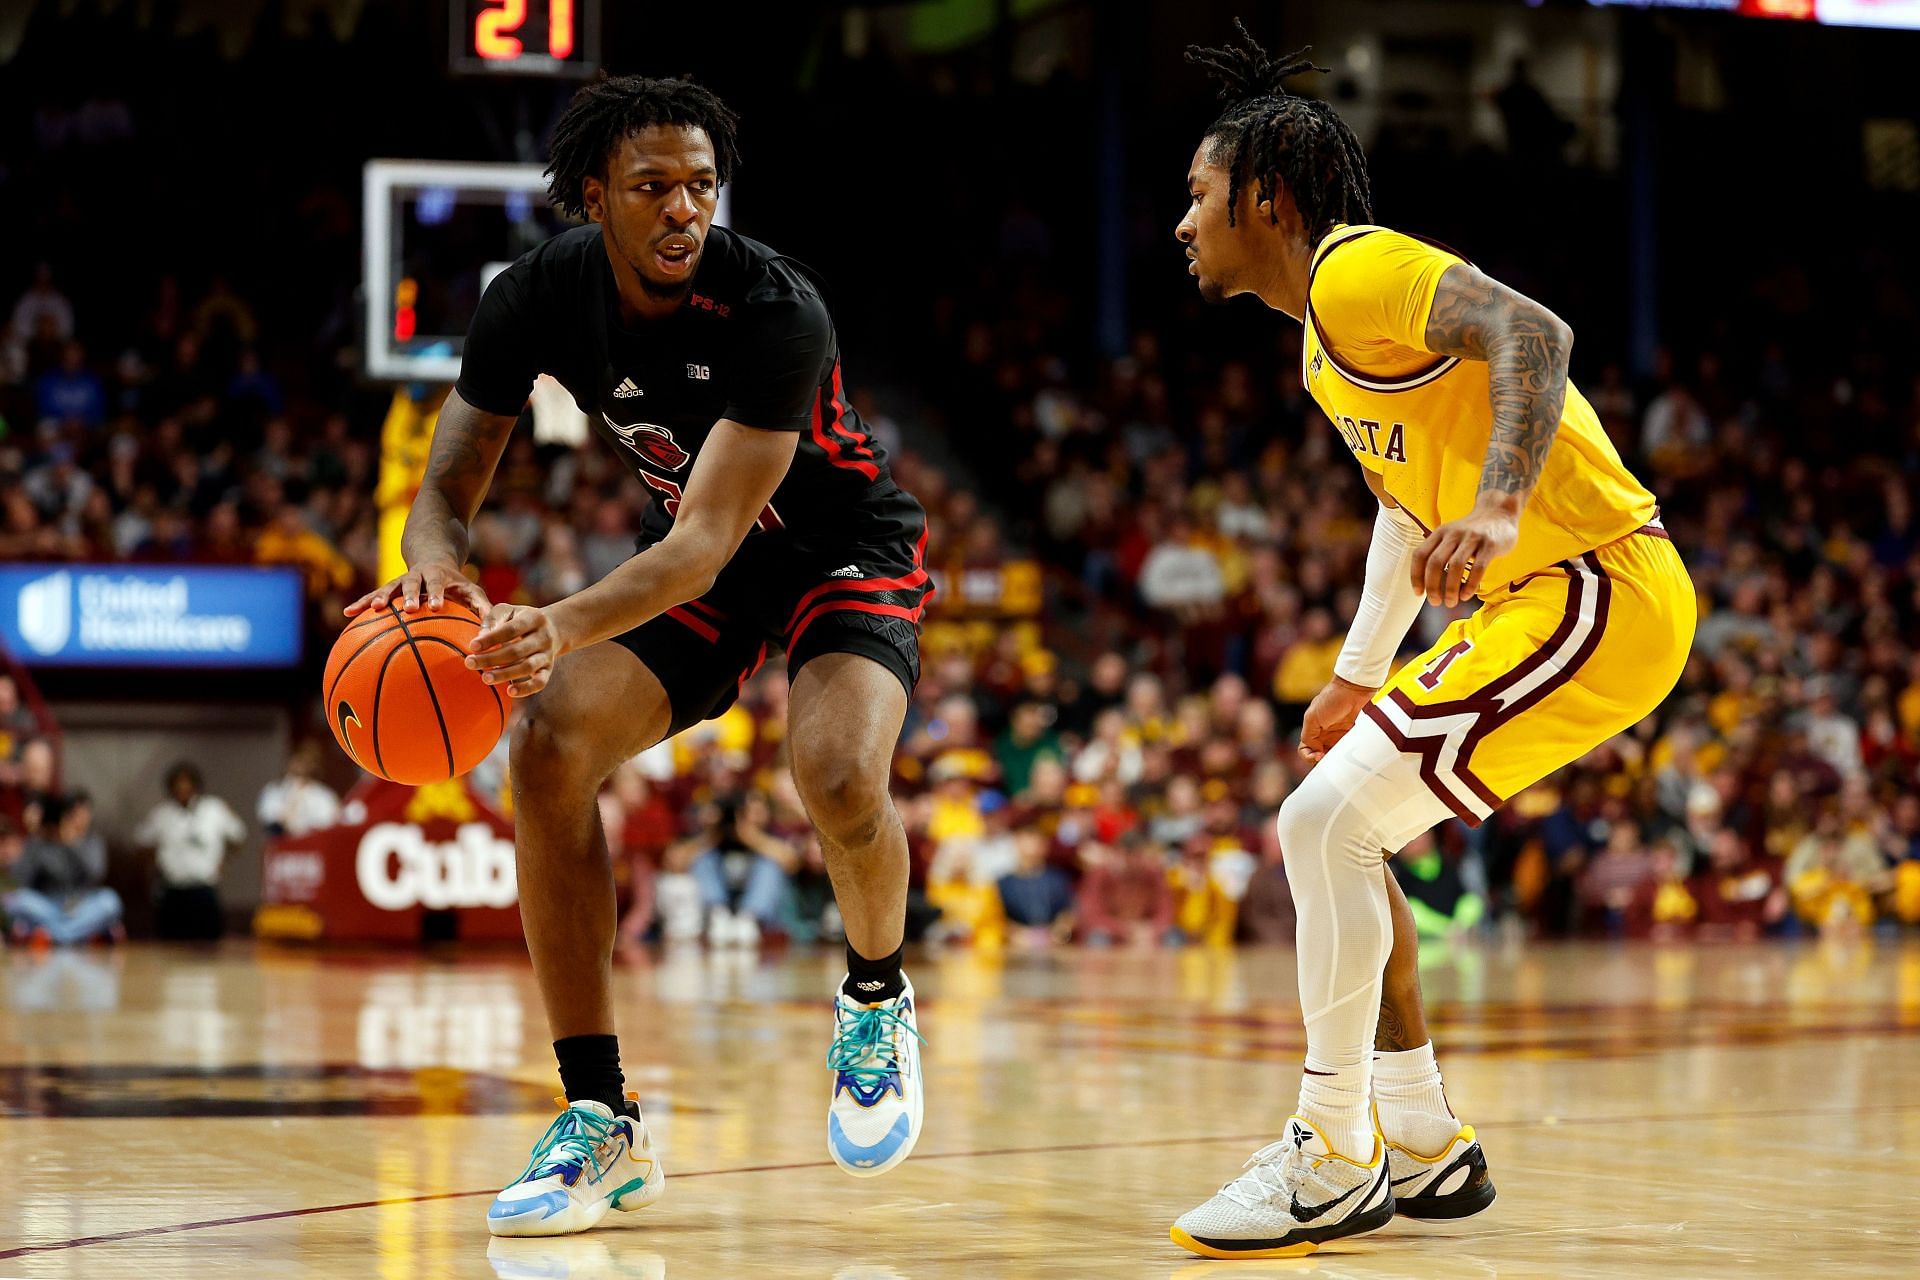 Jeremiah Williams #25 of the Rutgers Scarlet Knights dribbles the ball against Elijah Hawkins #0 of the Minnesota Golden Gophers.